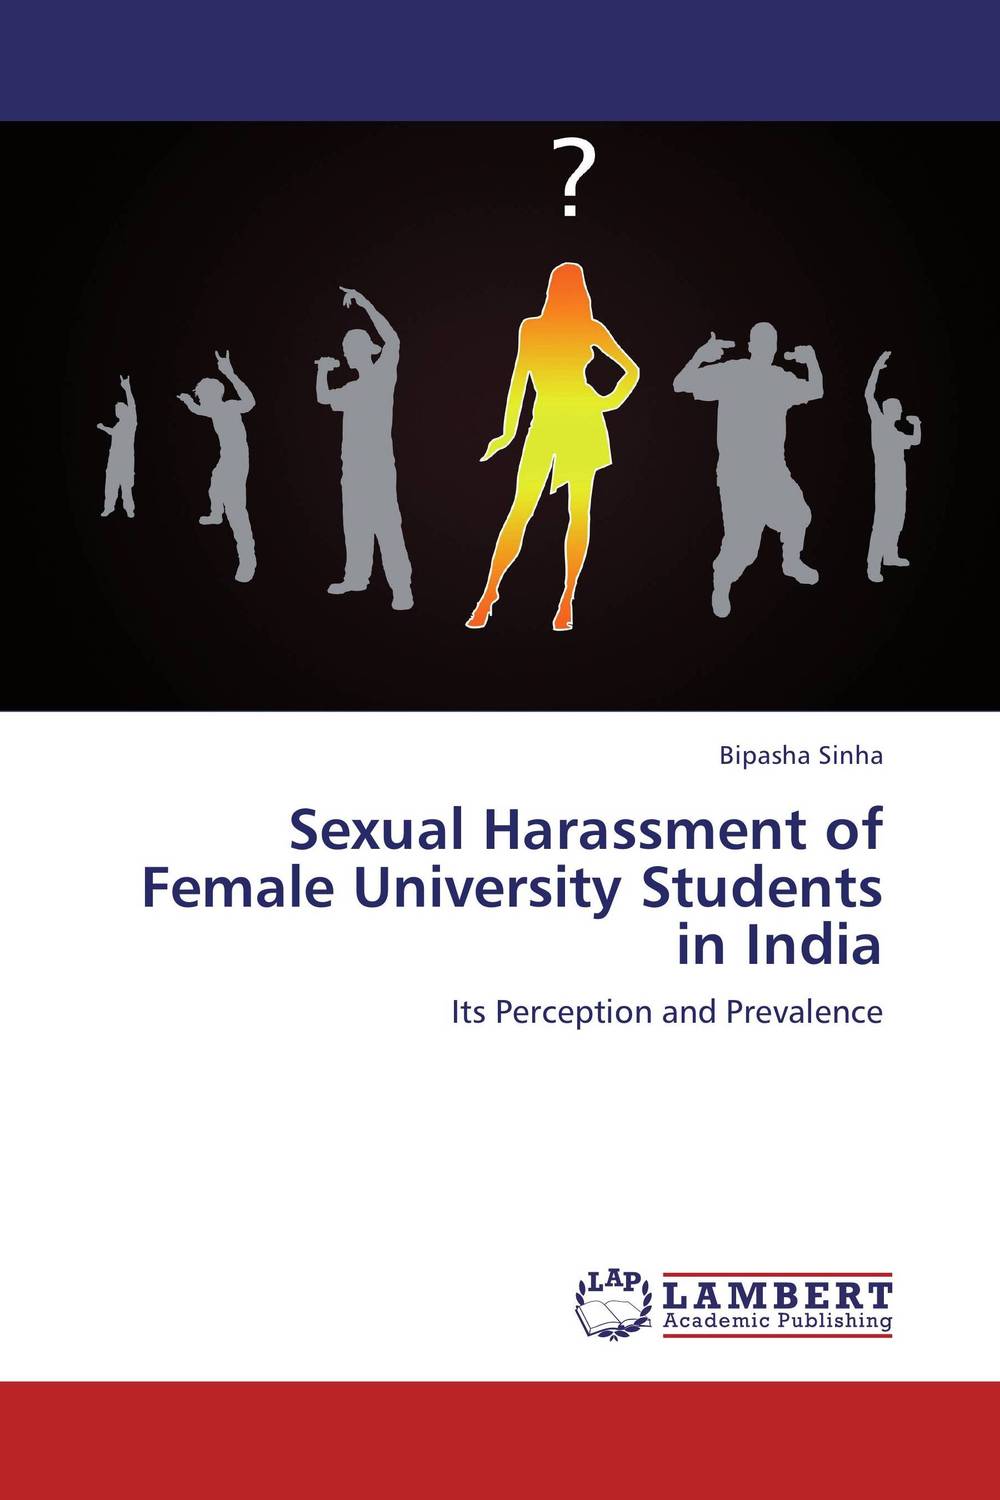 Sexual Harassment of Female University Students in India